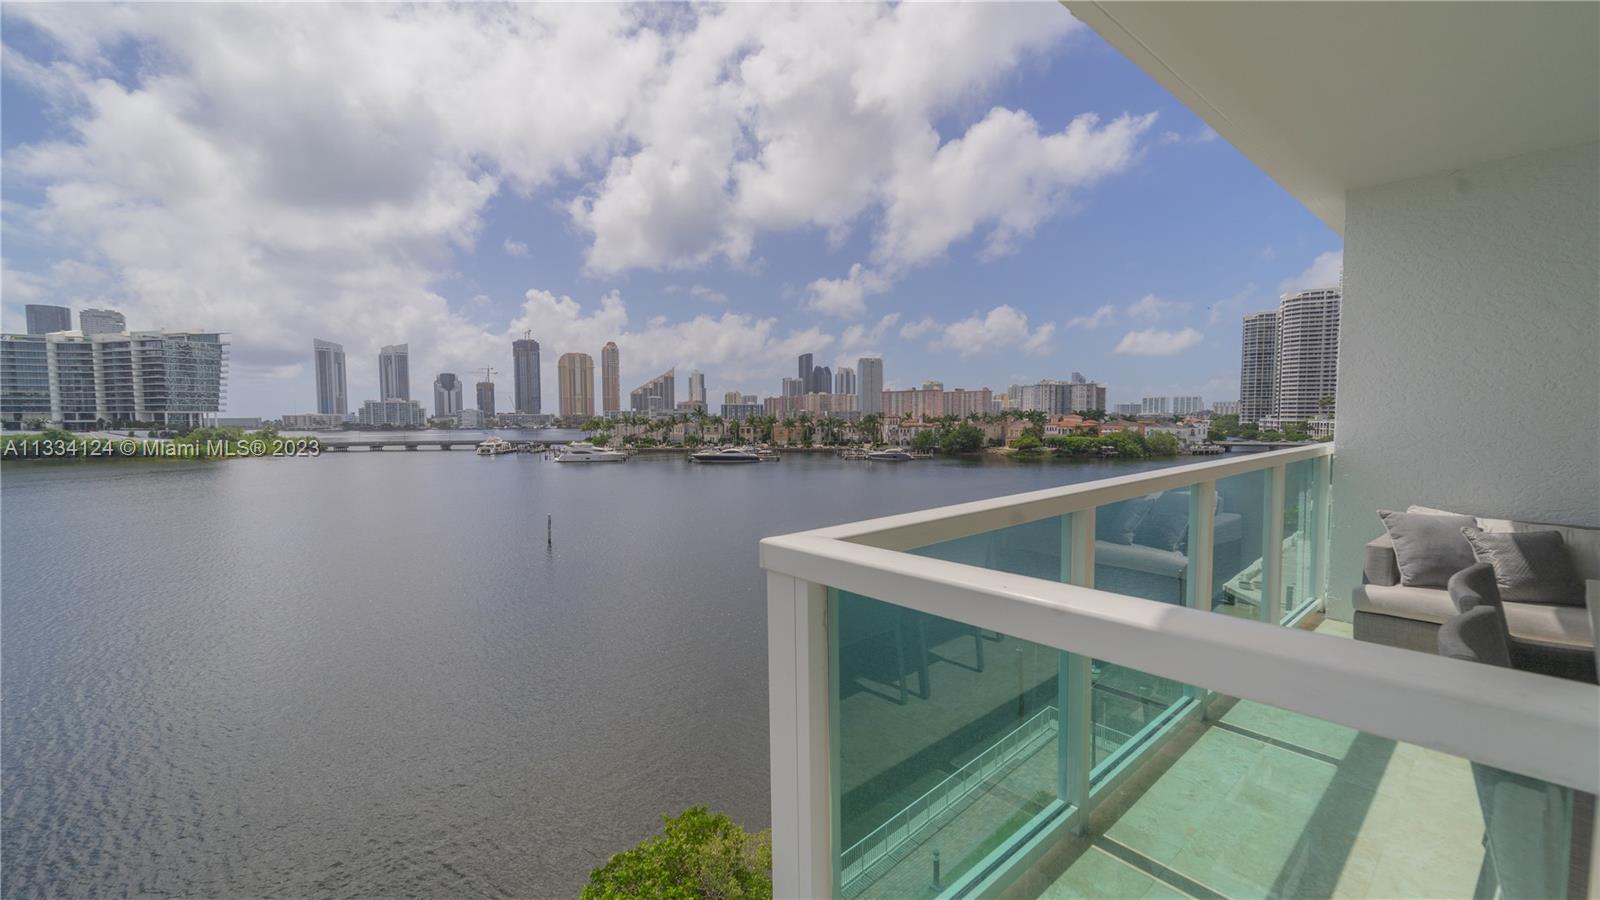 Amazing apartment in 07 line, the best 3-bedroom line in the building. 
3 bedroom, 3.5 bath + den. In addition, extra maid quarters and bathroom. 
Newly remodeled, new kitchen.
Great views, feels like you are on the water. You should come see it; like few others in the building.